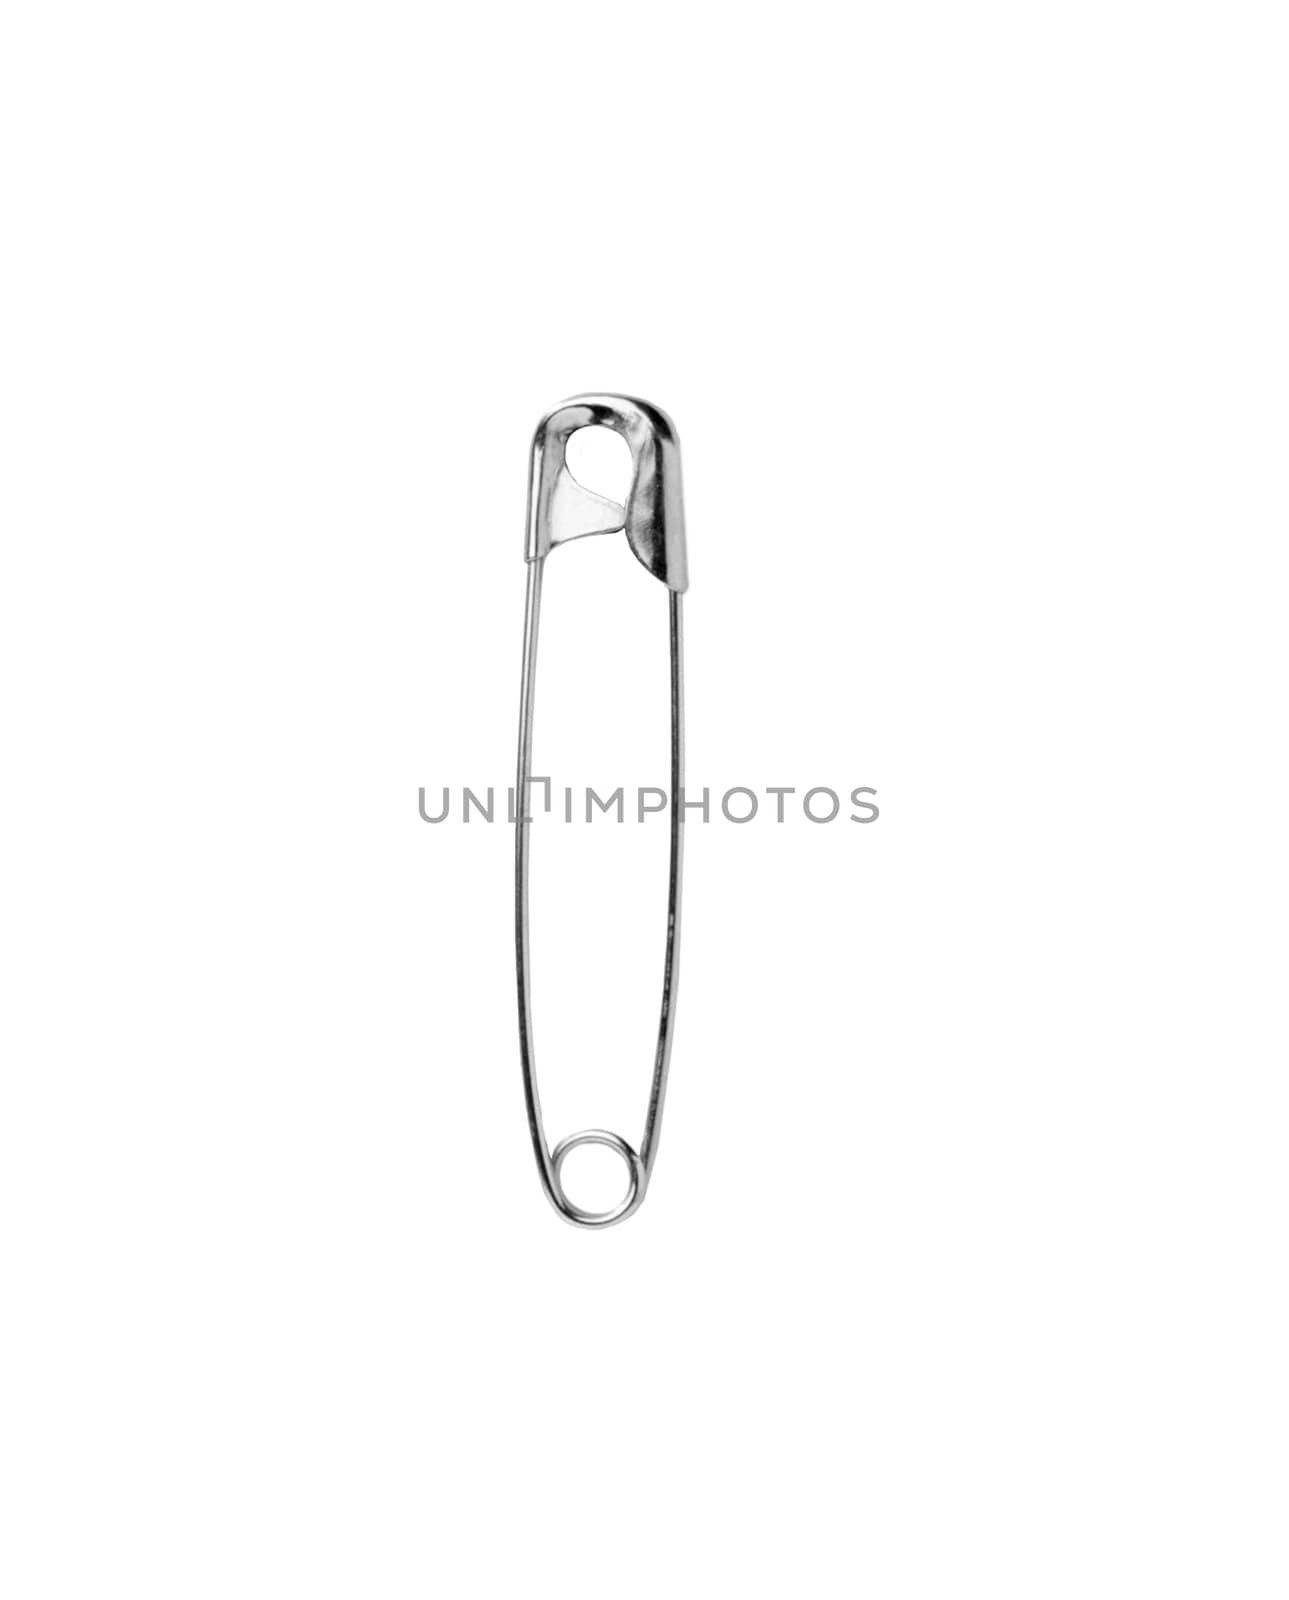 metal silhouette of a closed safety pin by shutswis